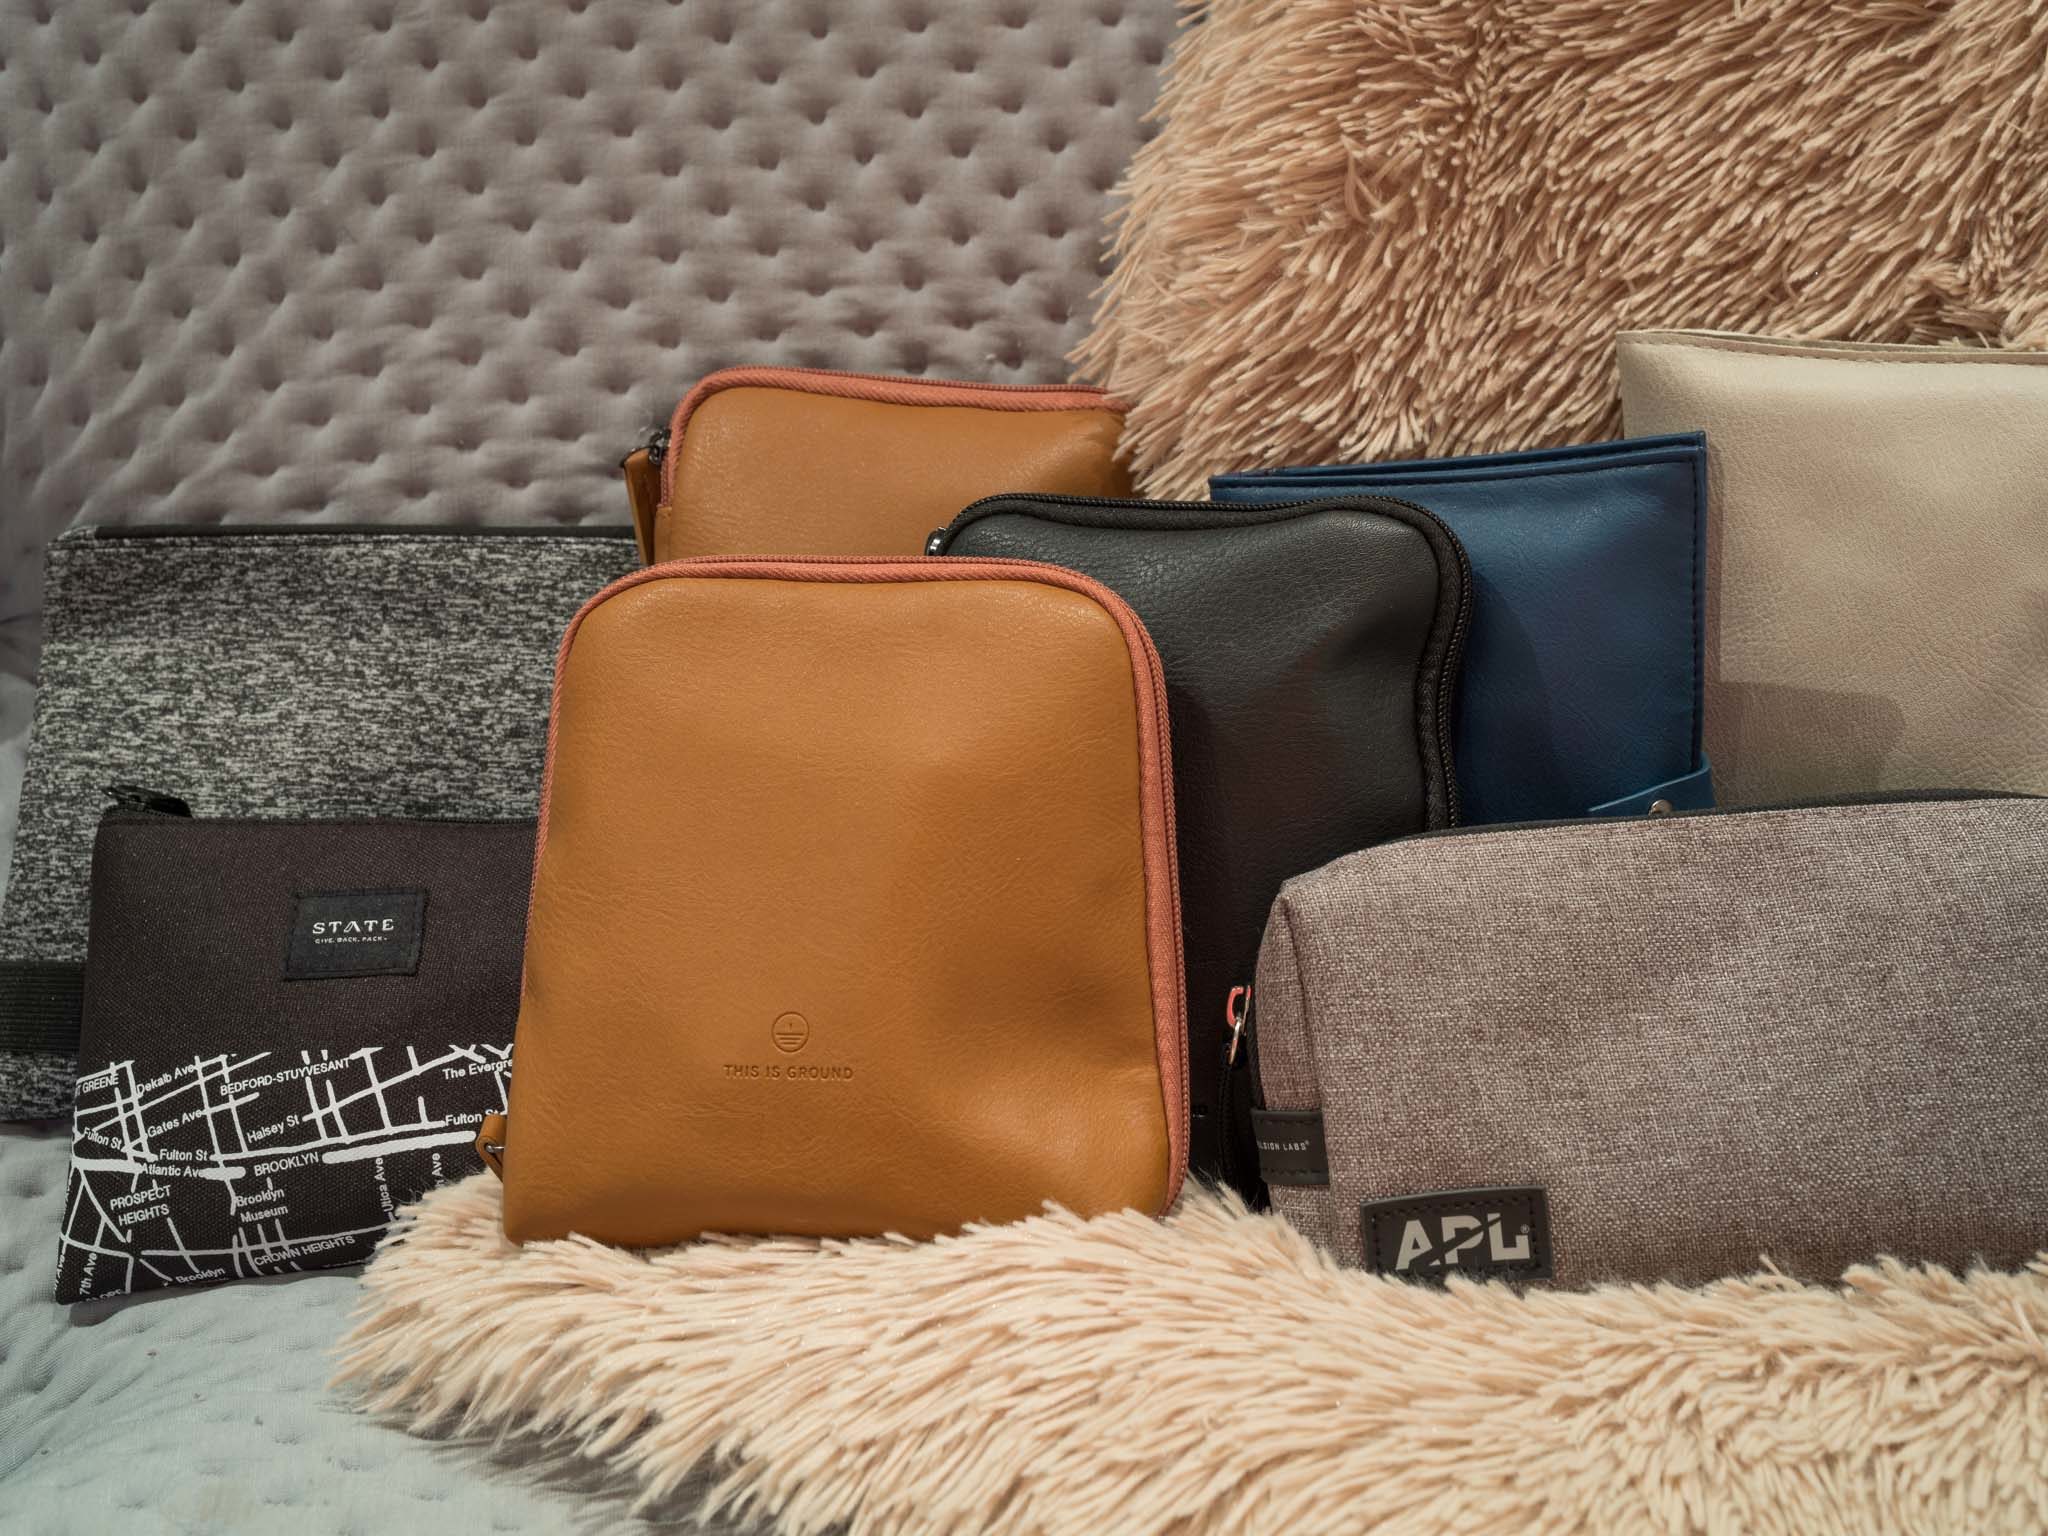 American Airlines debuts new amenity kits, I'm giving some away! Andy